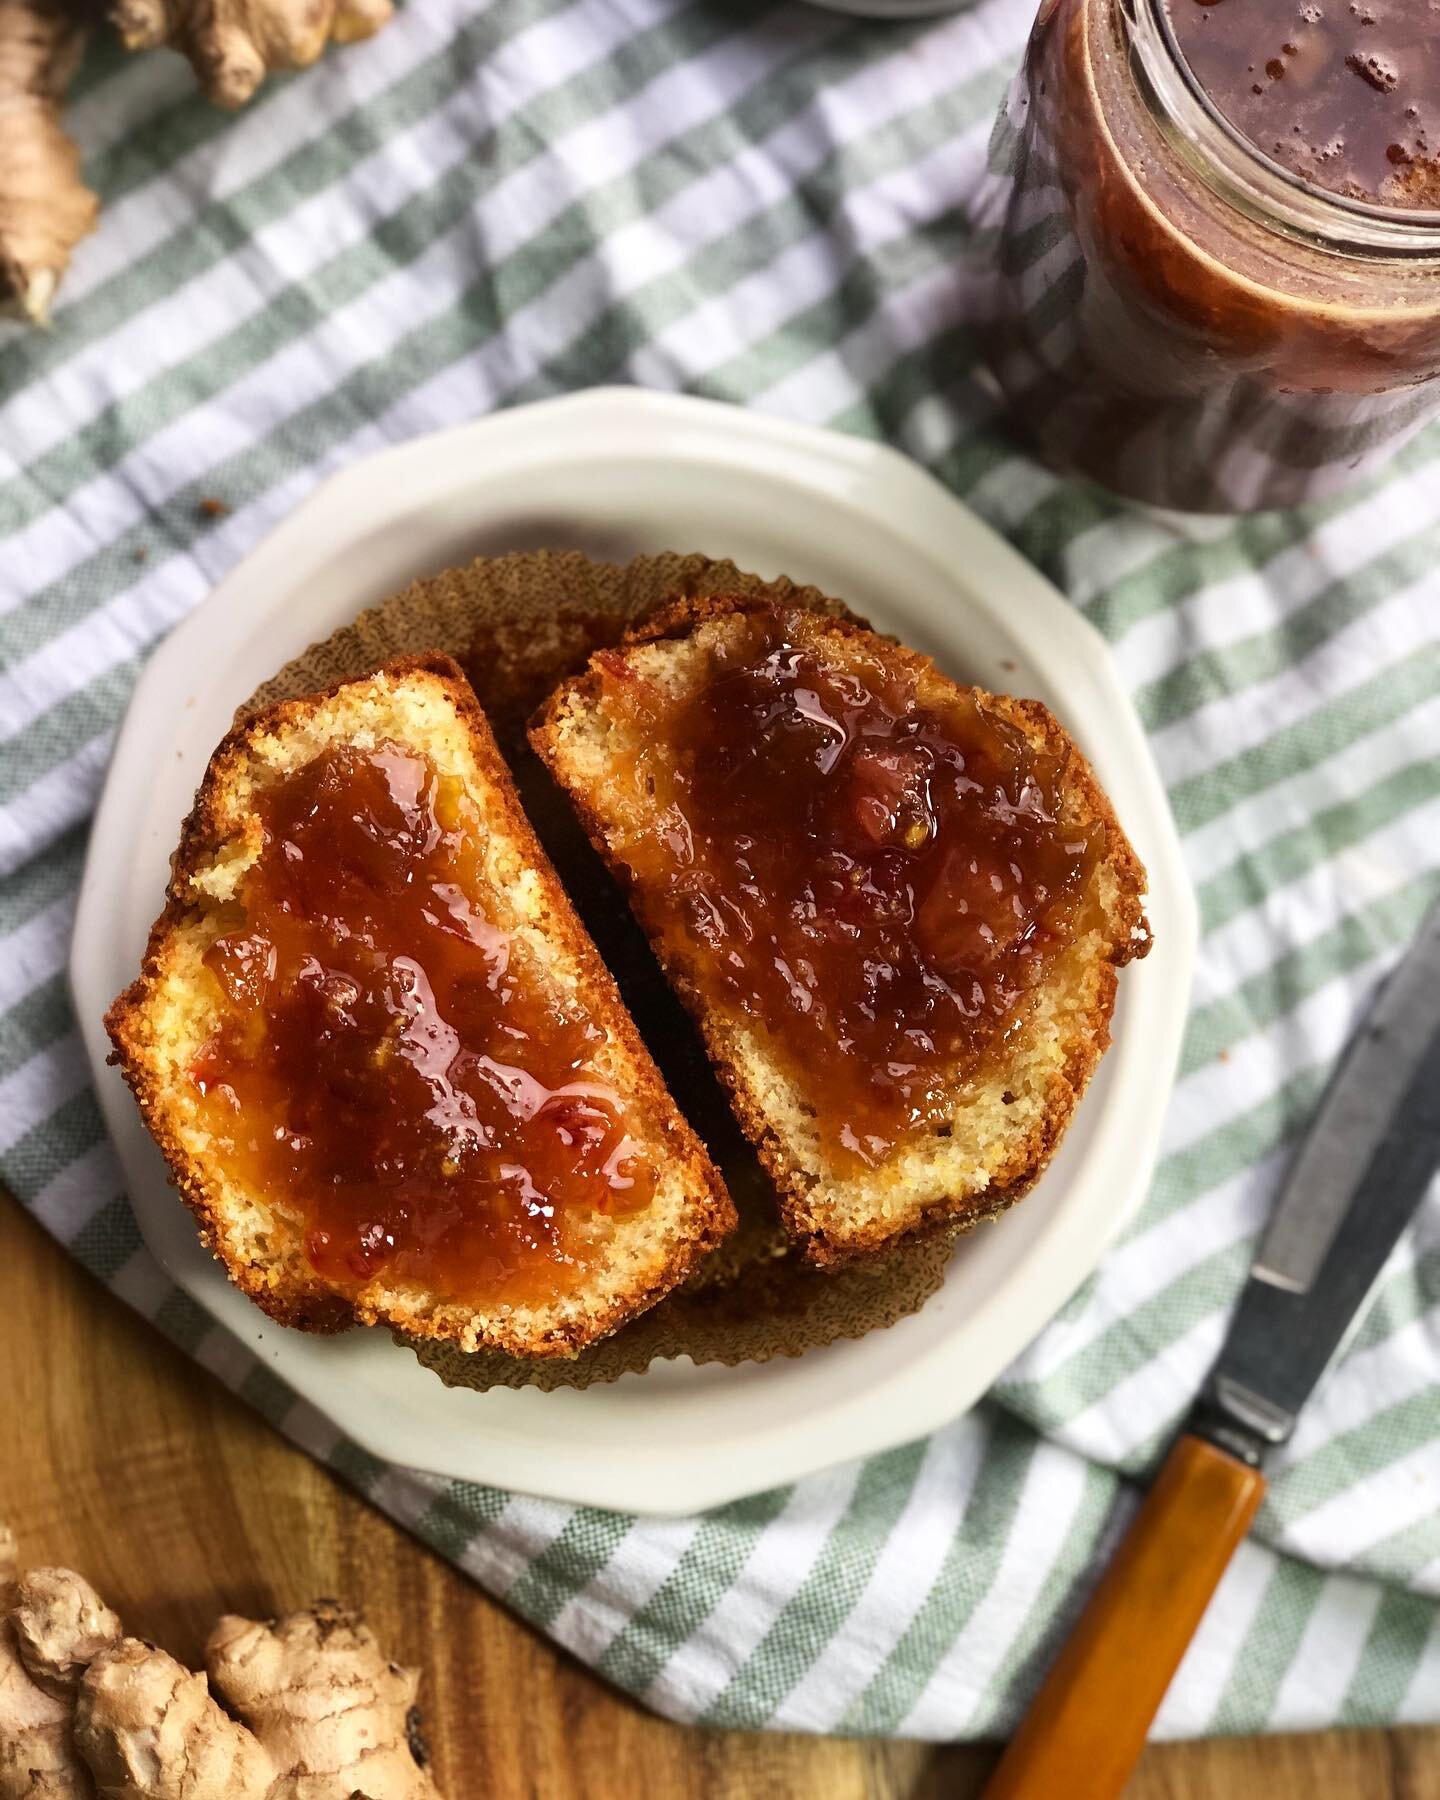 Newsflash: rhubarb season lasts through October! 🚨 (not June !!) 🚨
Make the most of rhuby&rsquo;s long season with my Ginger and Rhubarb Jam! It&rsquo;s on the blog now, plus sustainability tips, natch 💁🏼&zwj;♀️🌱
.
.
.
#sustainedkitchen #recipe 